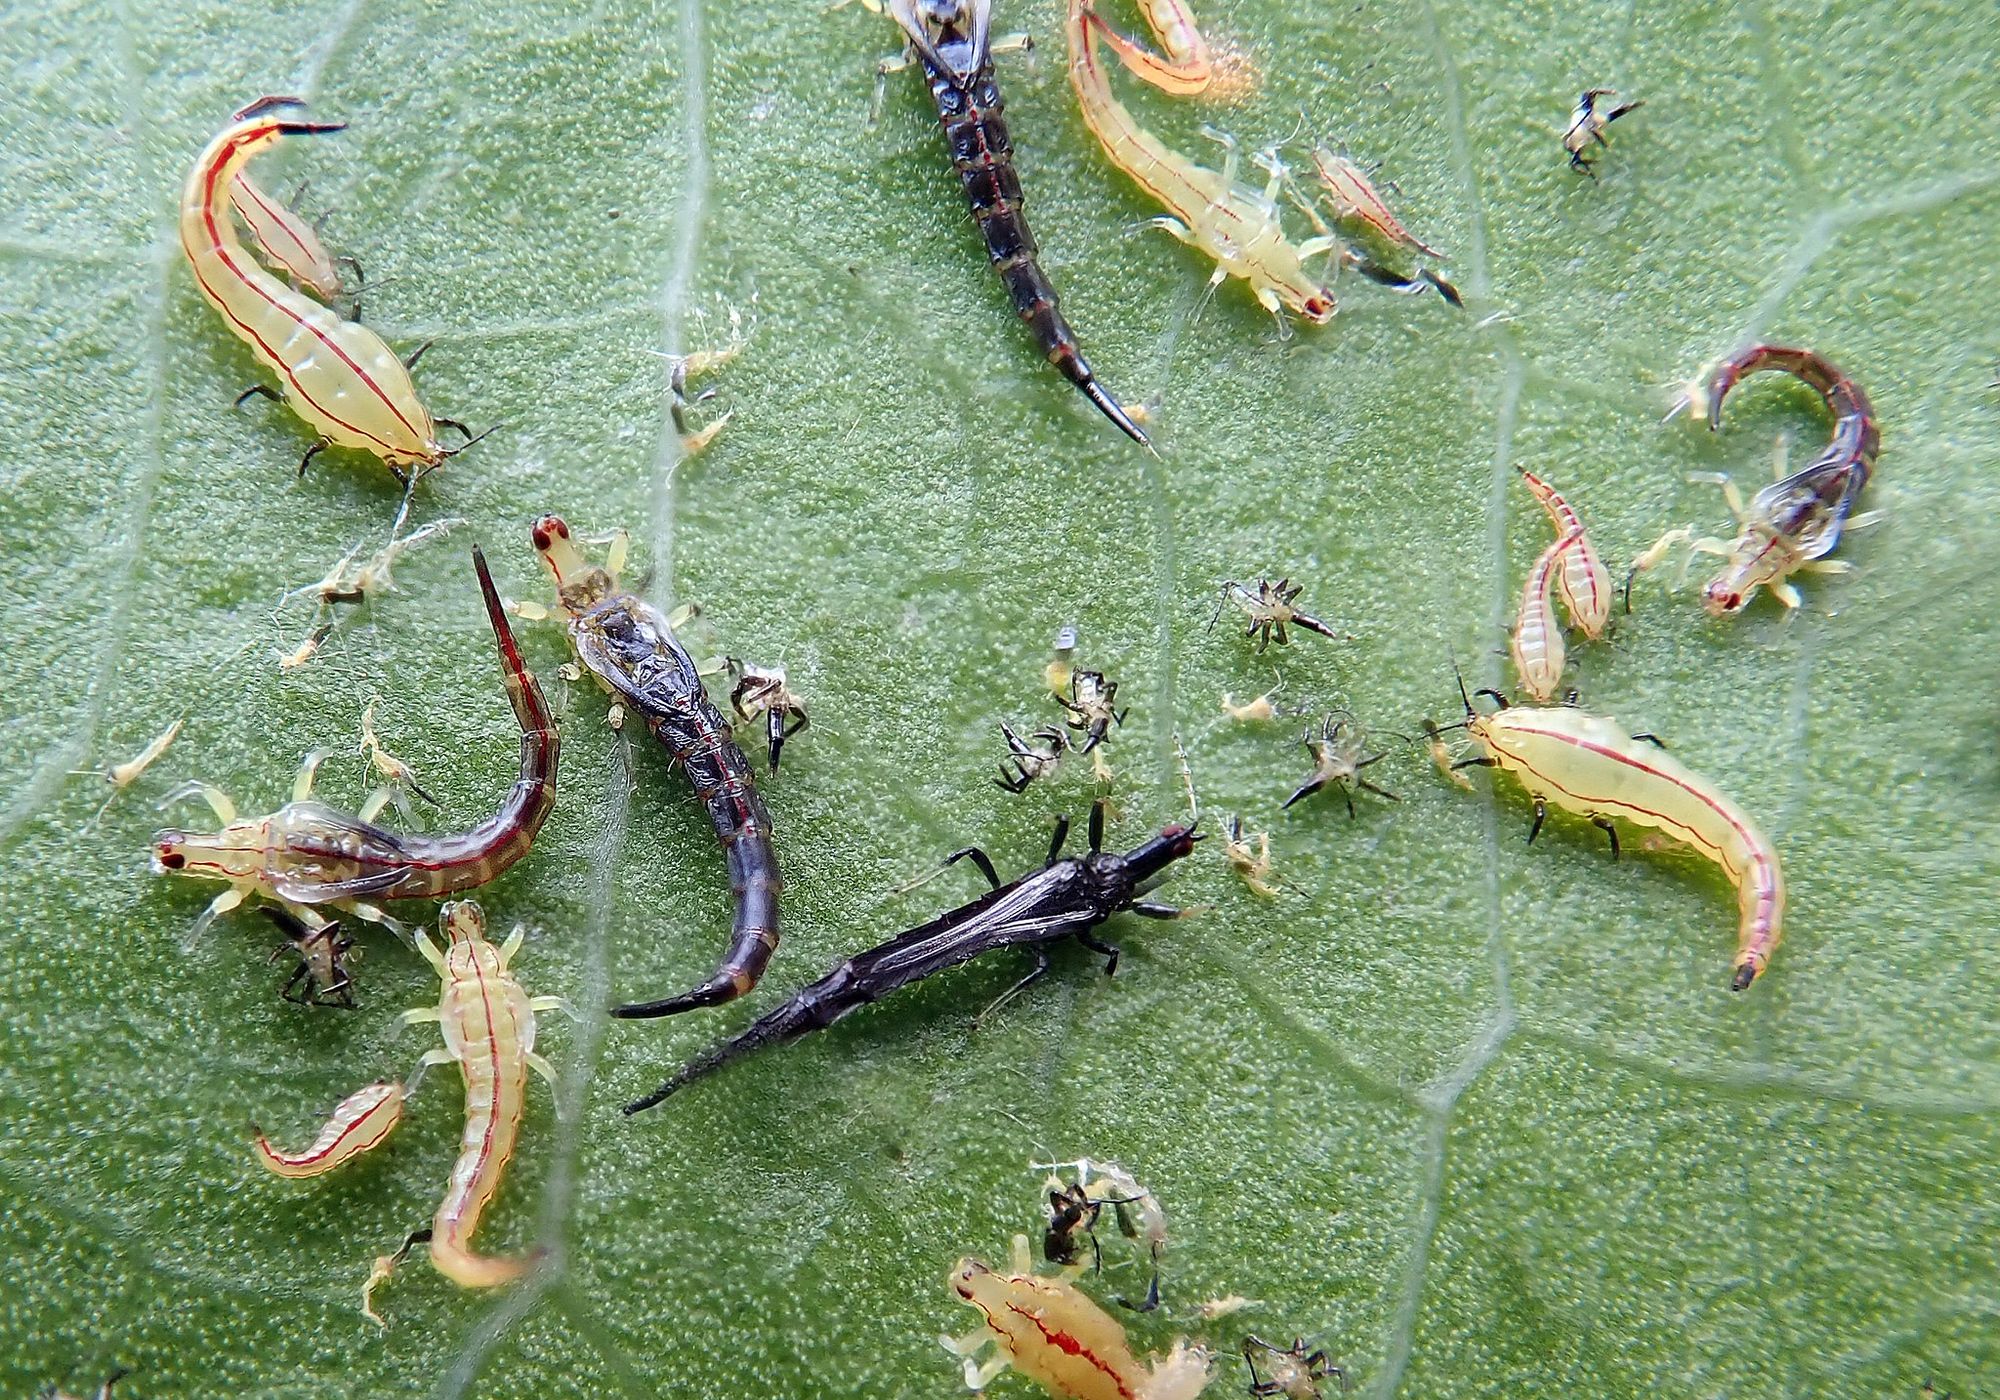 Tube-tailed Thrips